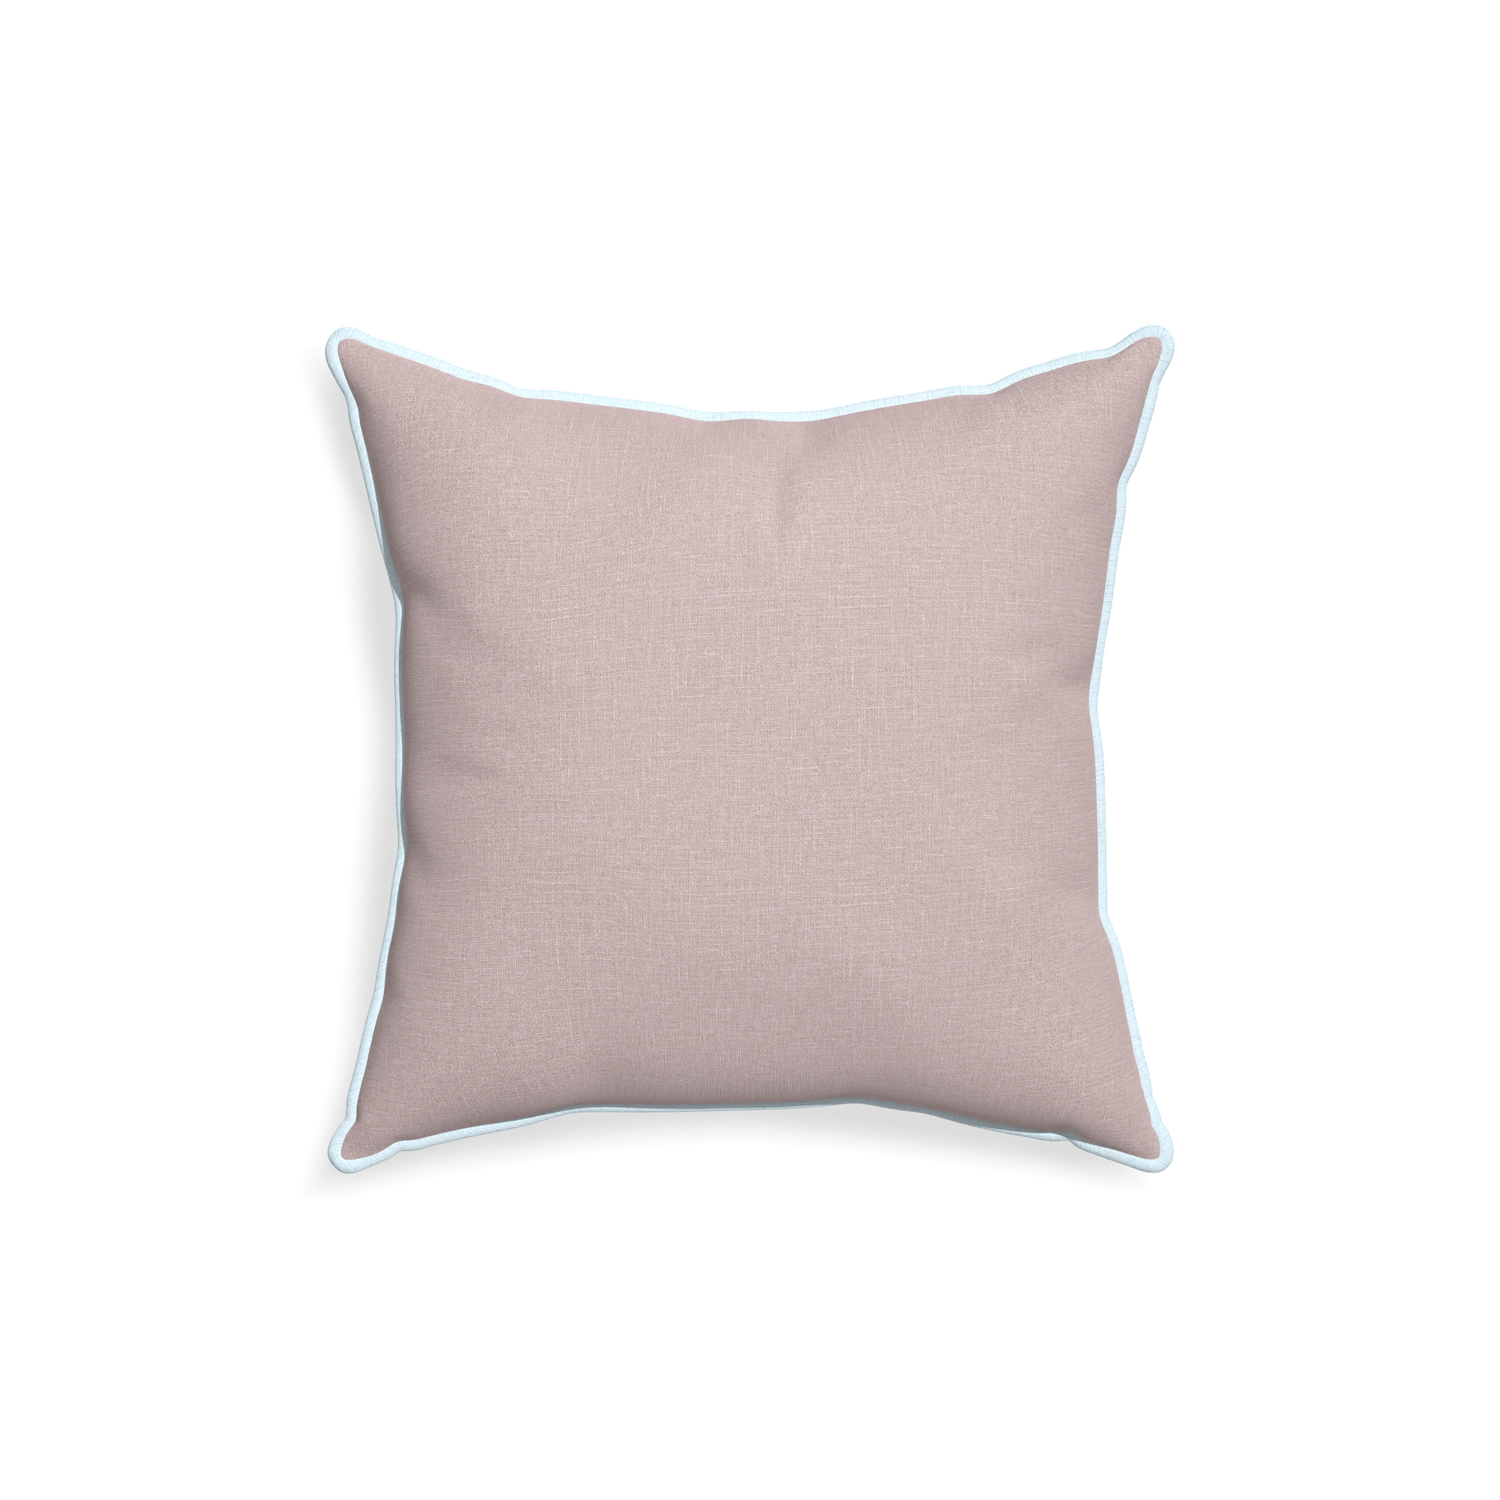 18-square orchid custom mauve pinkpillow with powder piping on white background